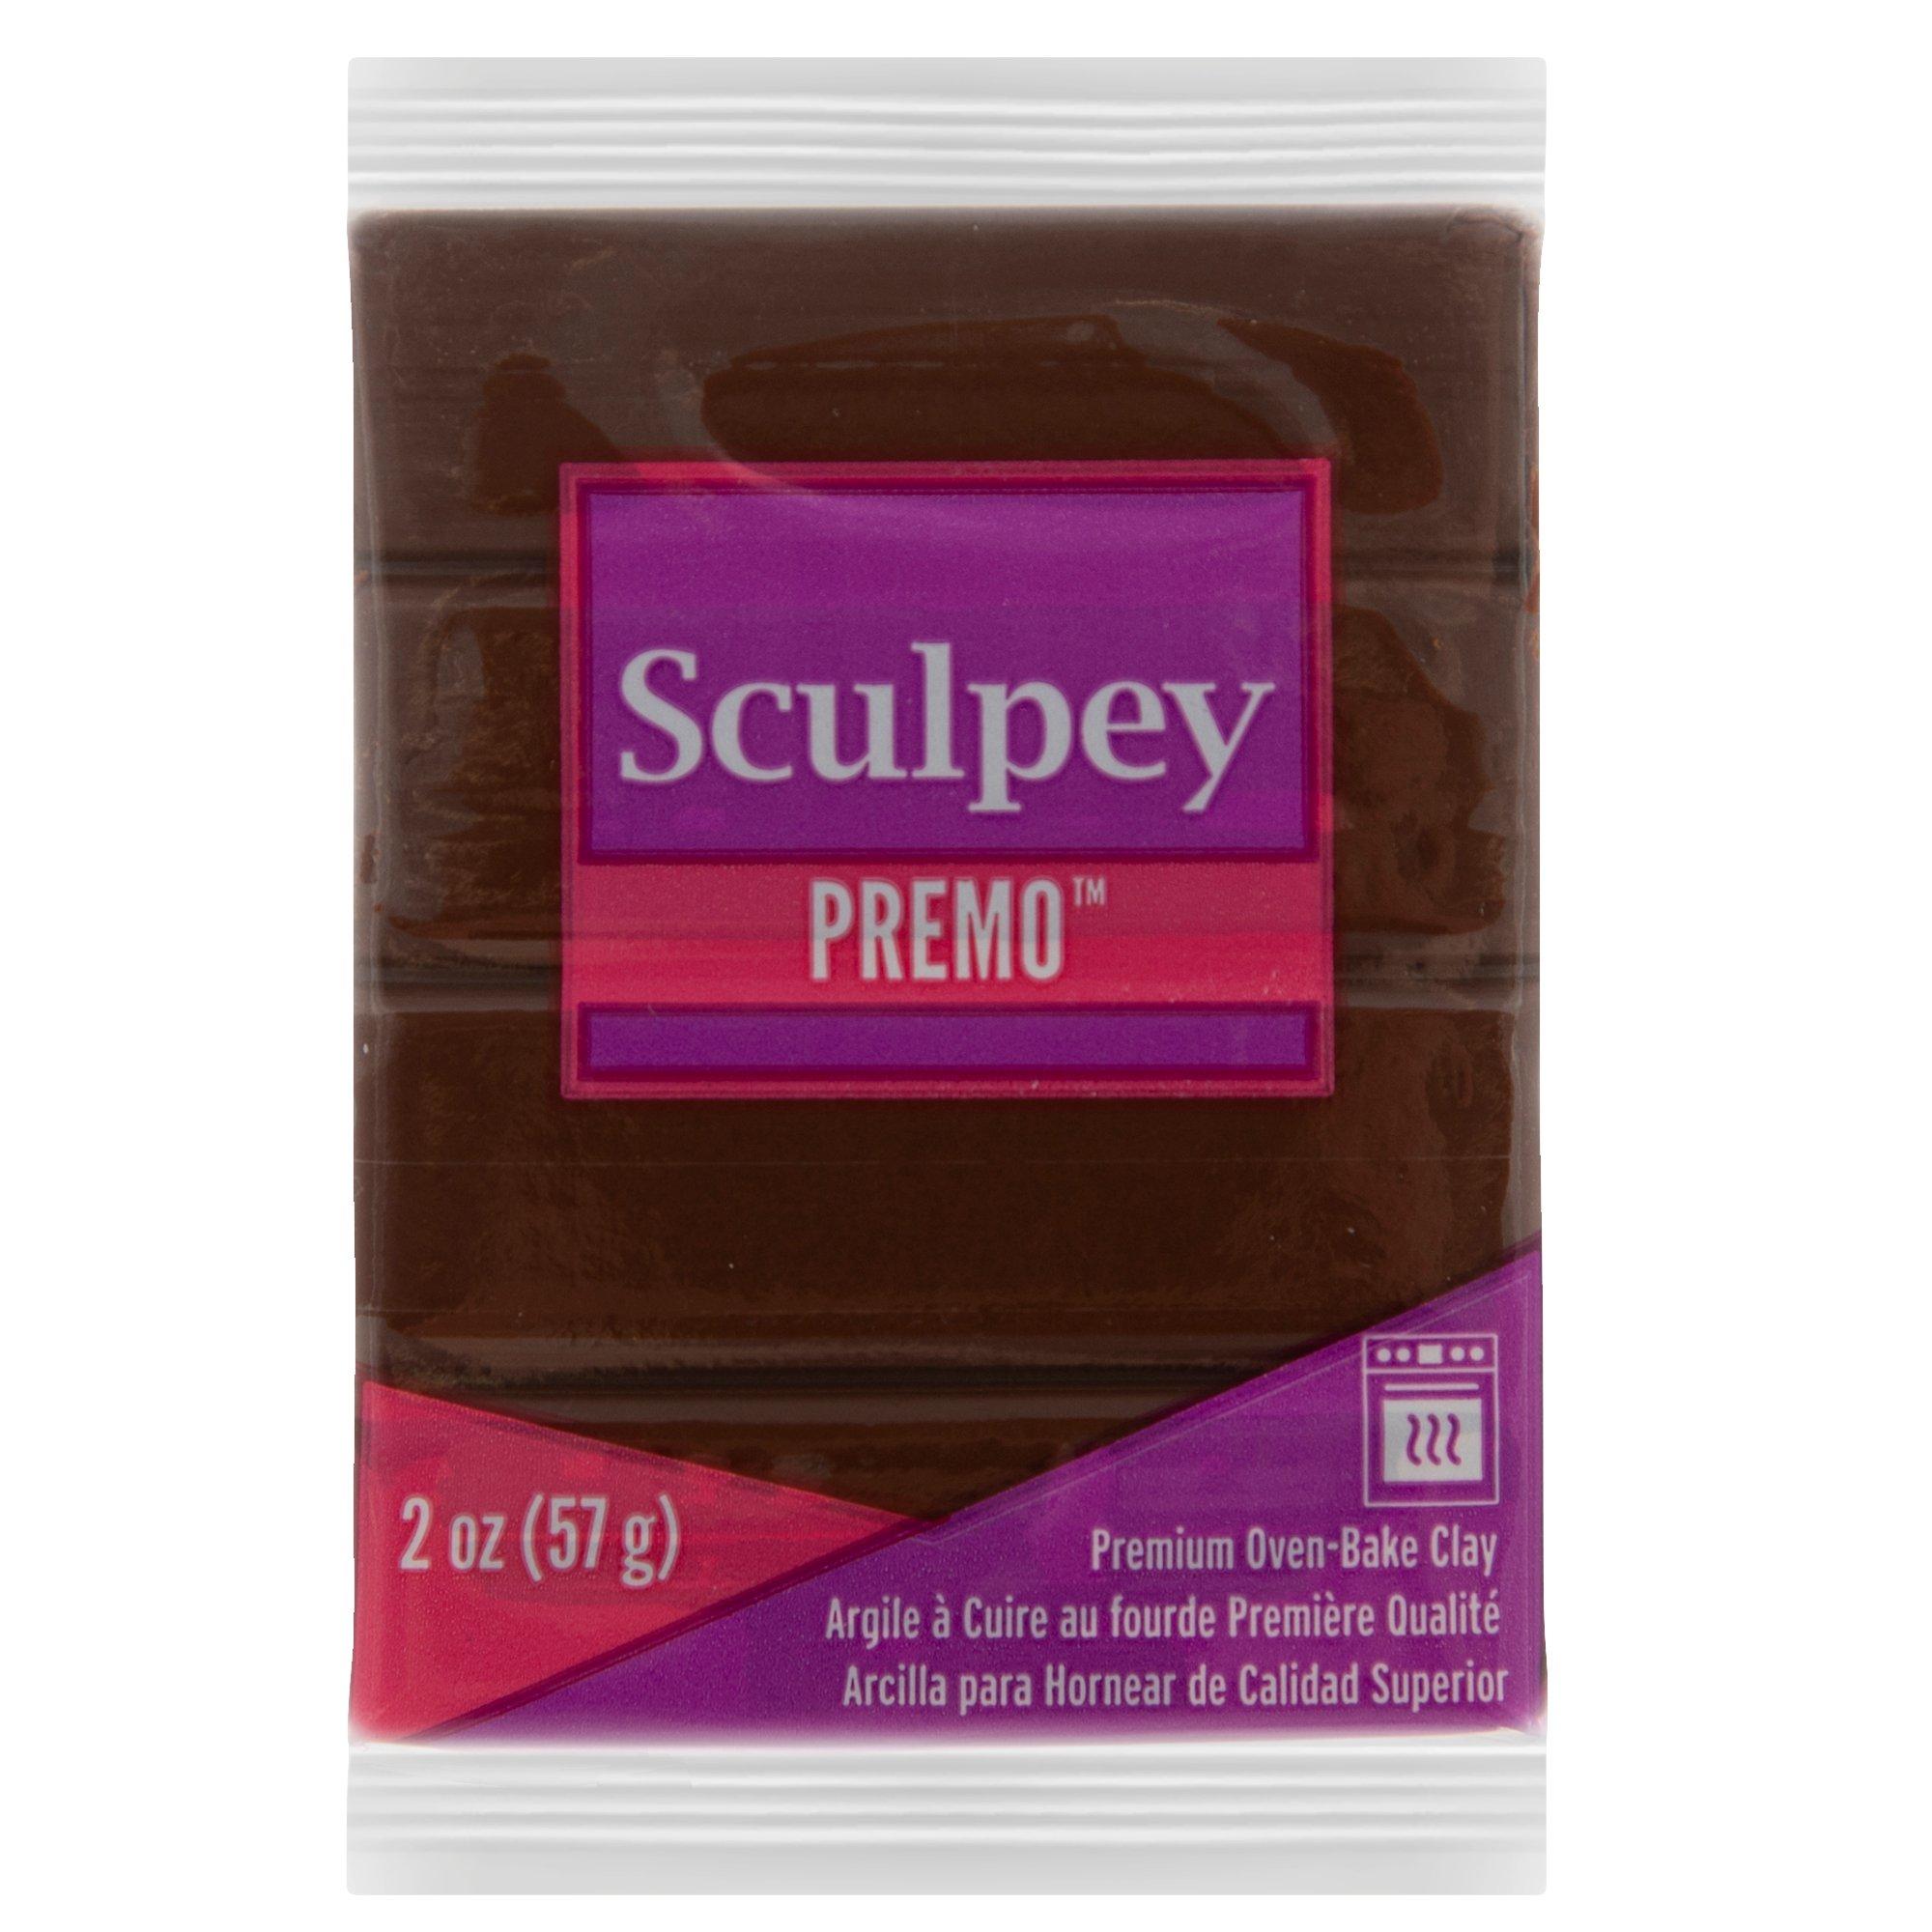 Sculpey PREMO Polymer Clay - Large 1LB Block - Modeling Oven Bake Jewellery